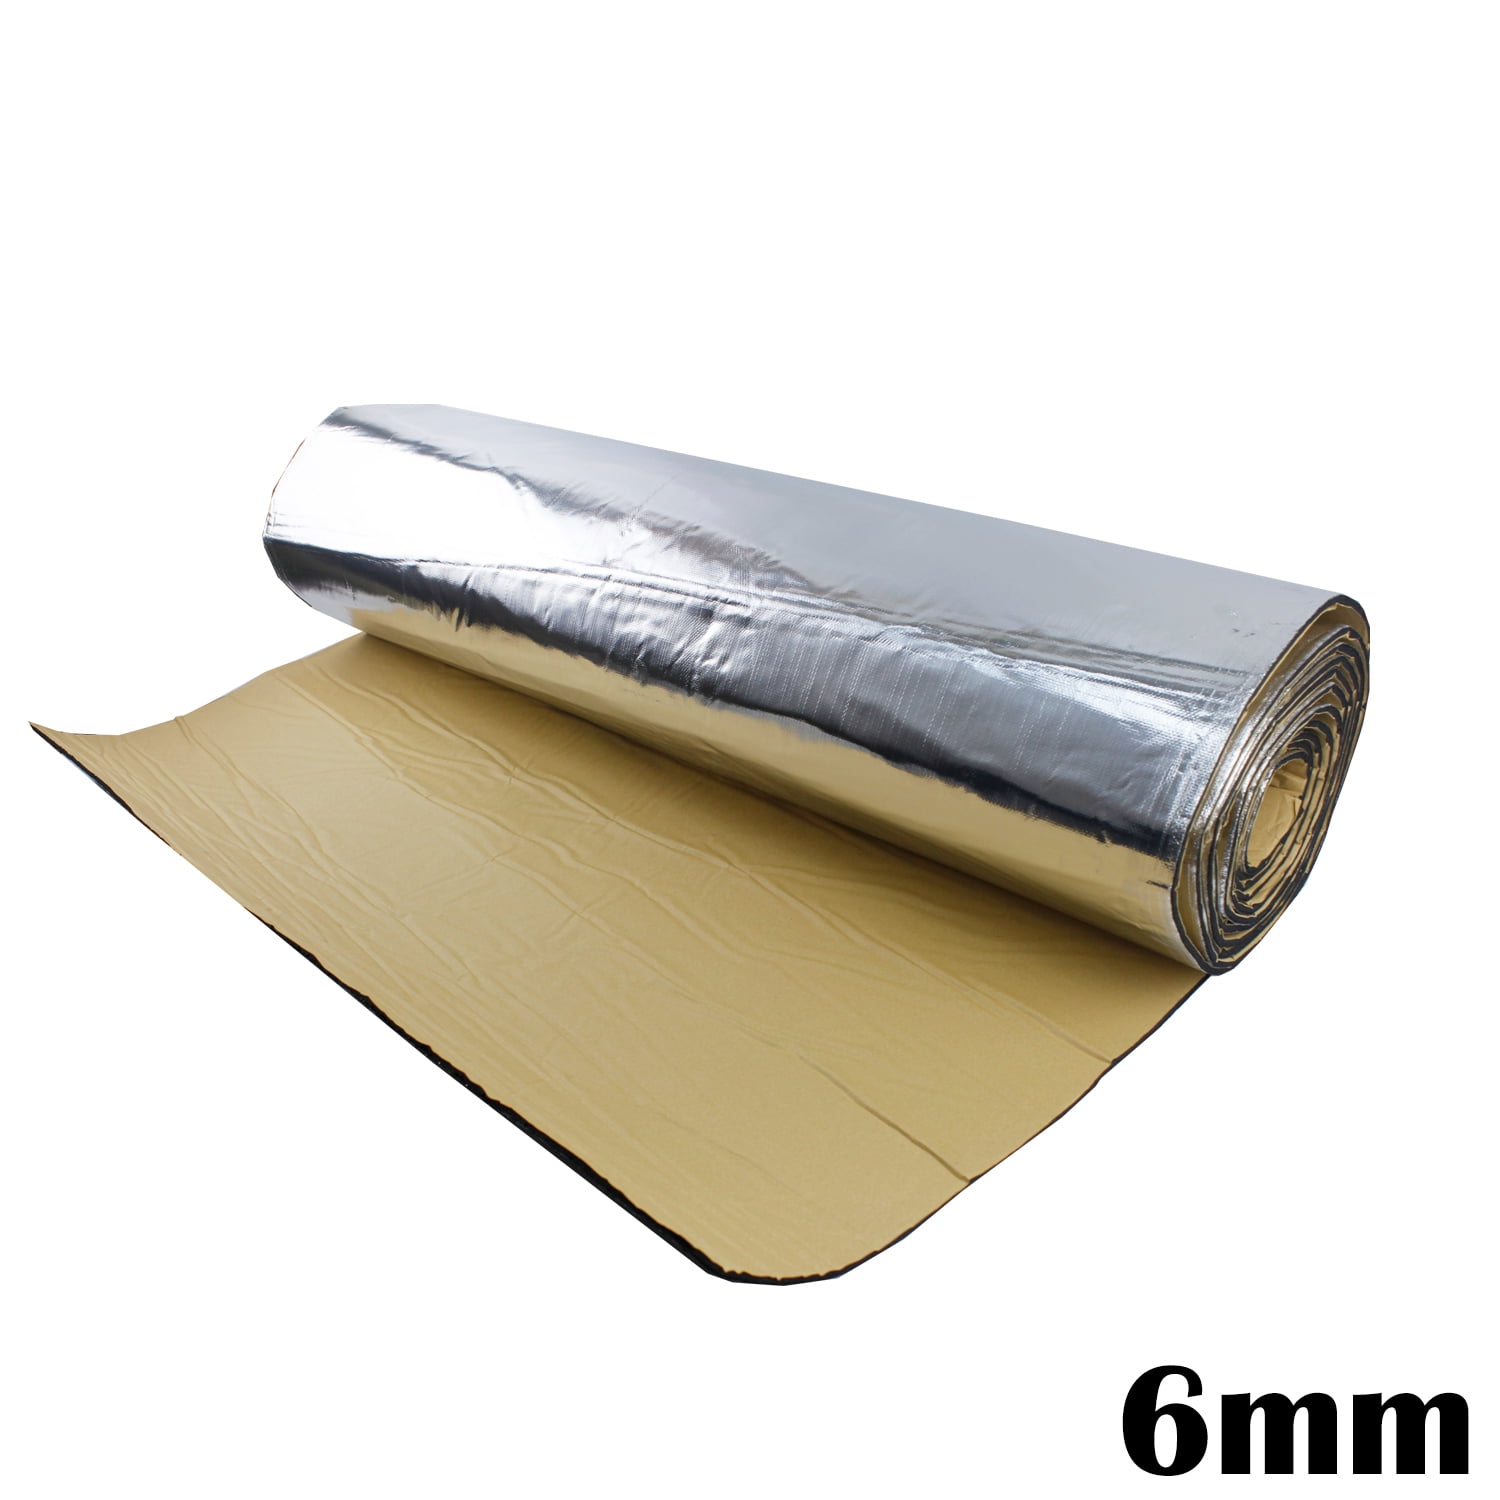 Car Heat Shield Insulation Sound Deadening Material Adhesive Noise Reduce  1/4